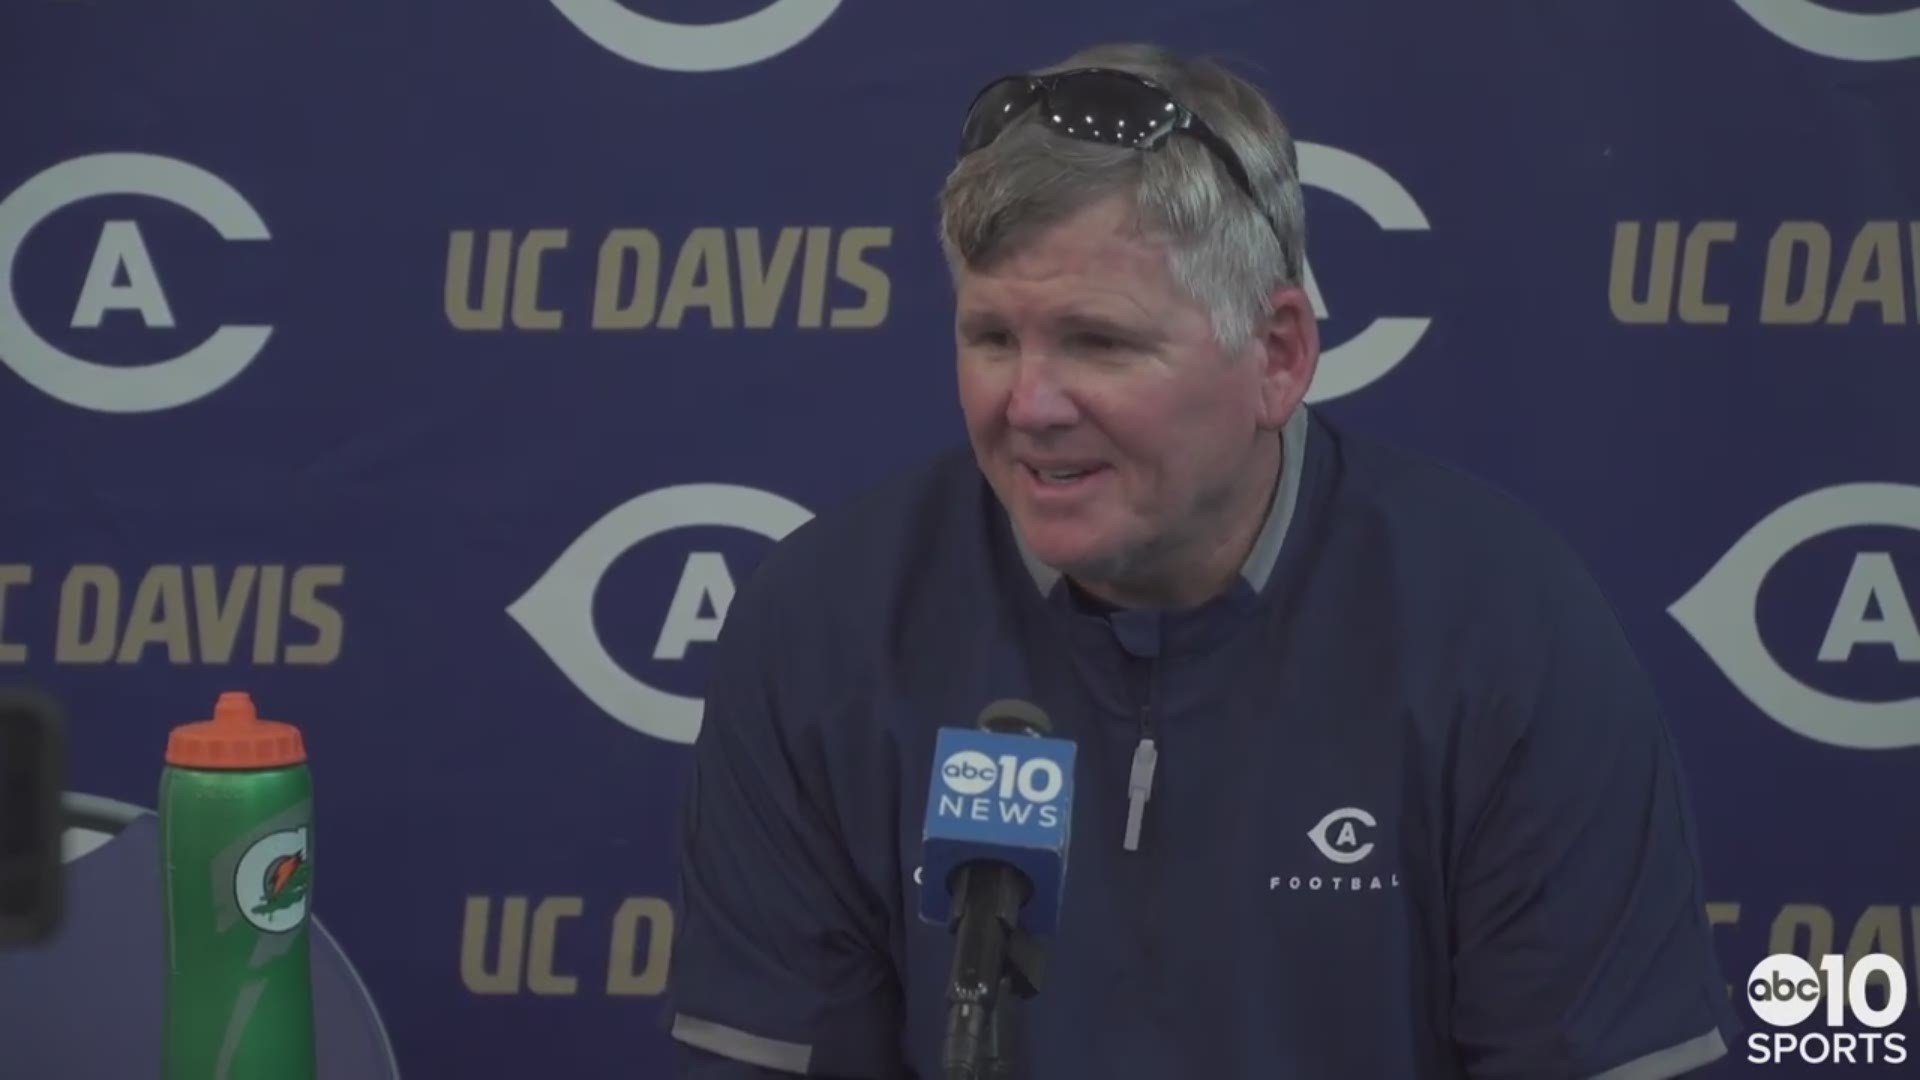 UC Davis Aggies head football coach Dan Hawkins talks about the season opener coming up at Cal, the matchup with the Golden Bears, the preseason accolades for quarterback Jake Maier and his former star wide receiver making a name for himself with the Oakland Raiders.